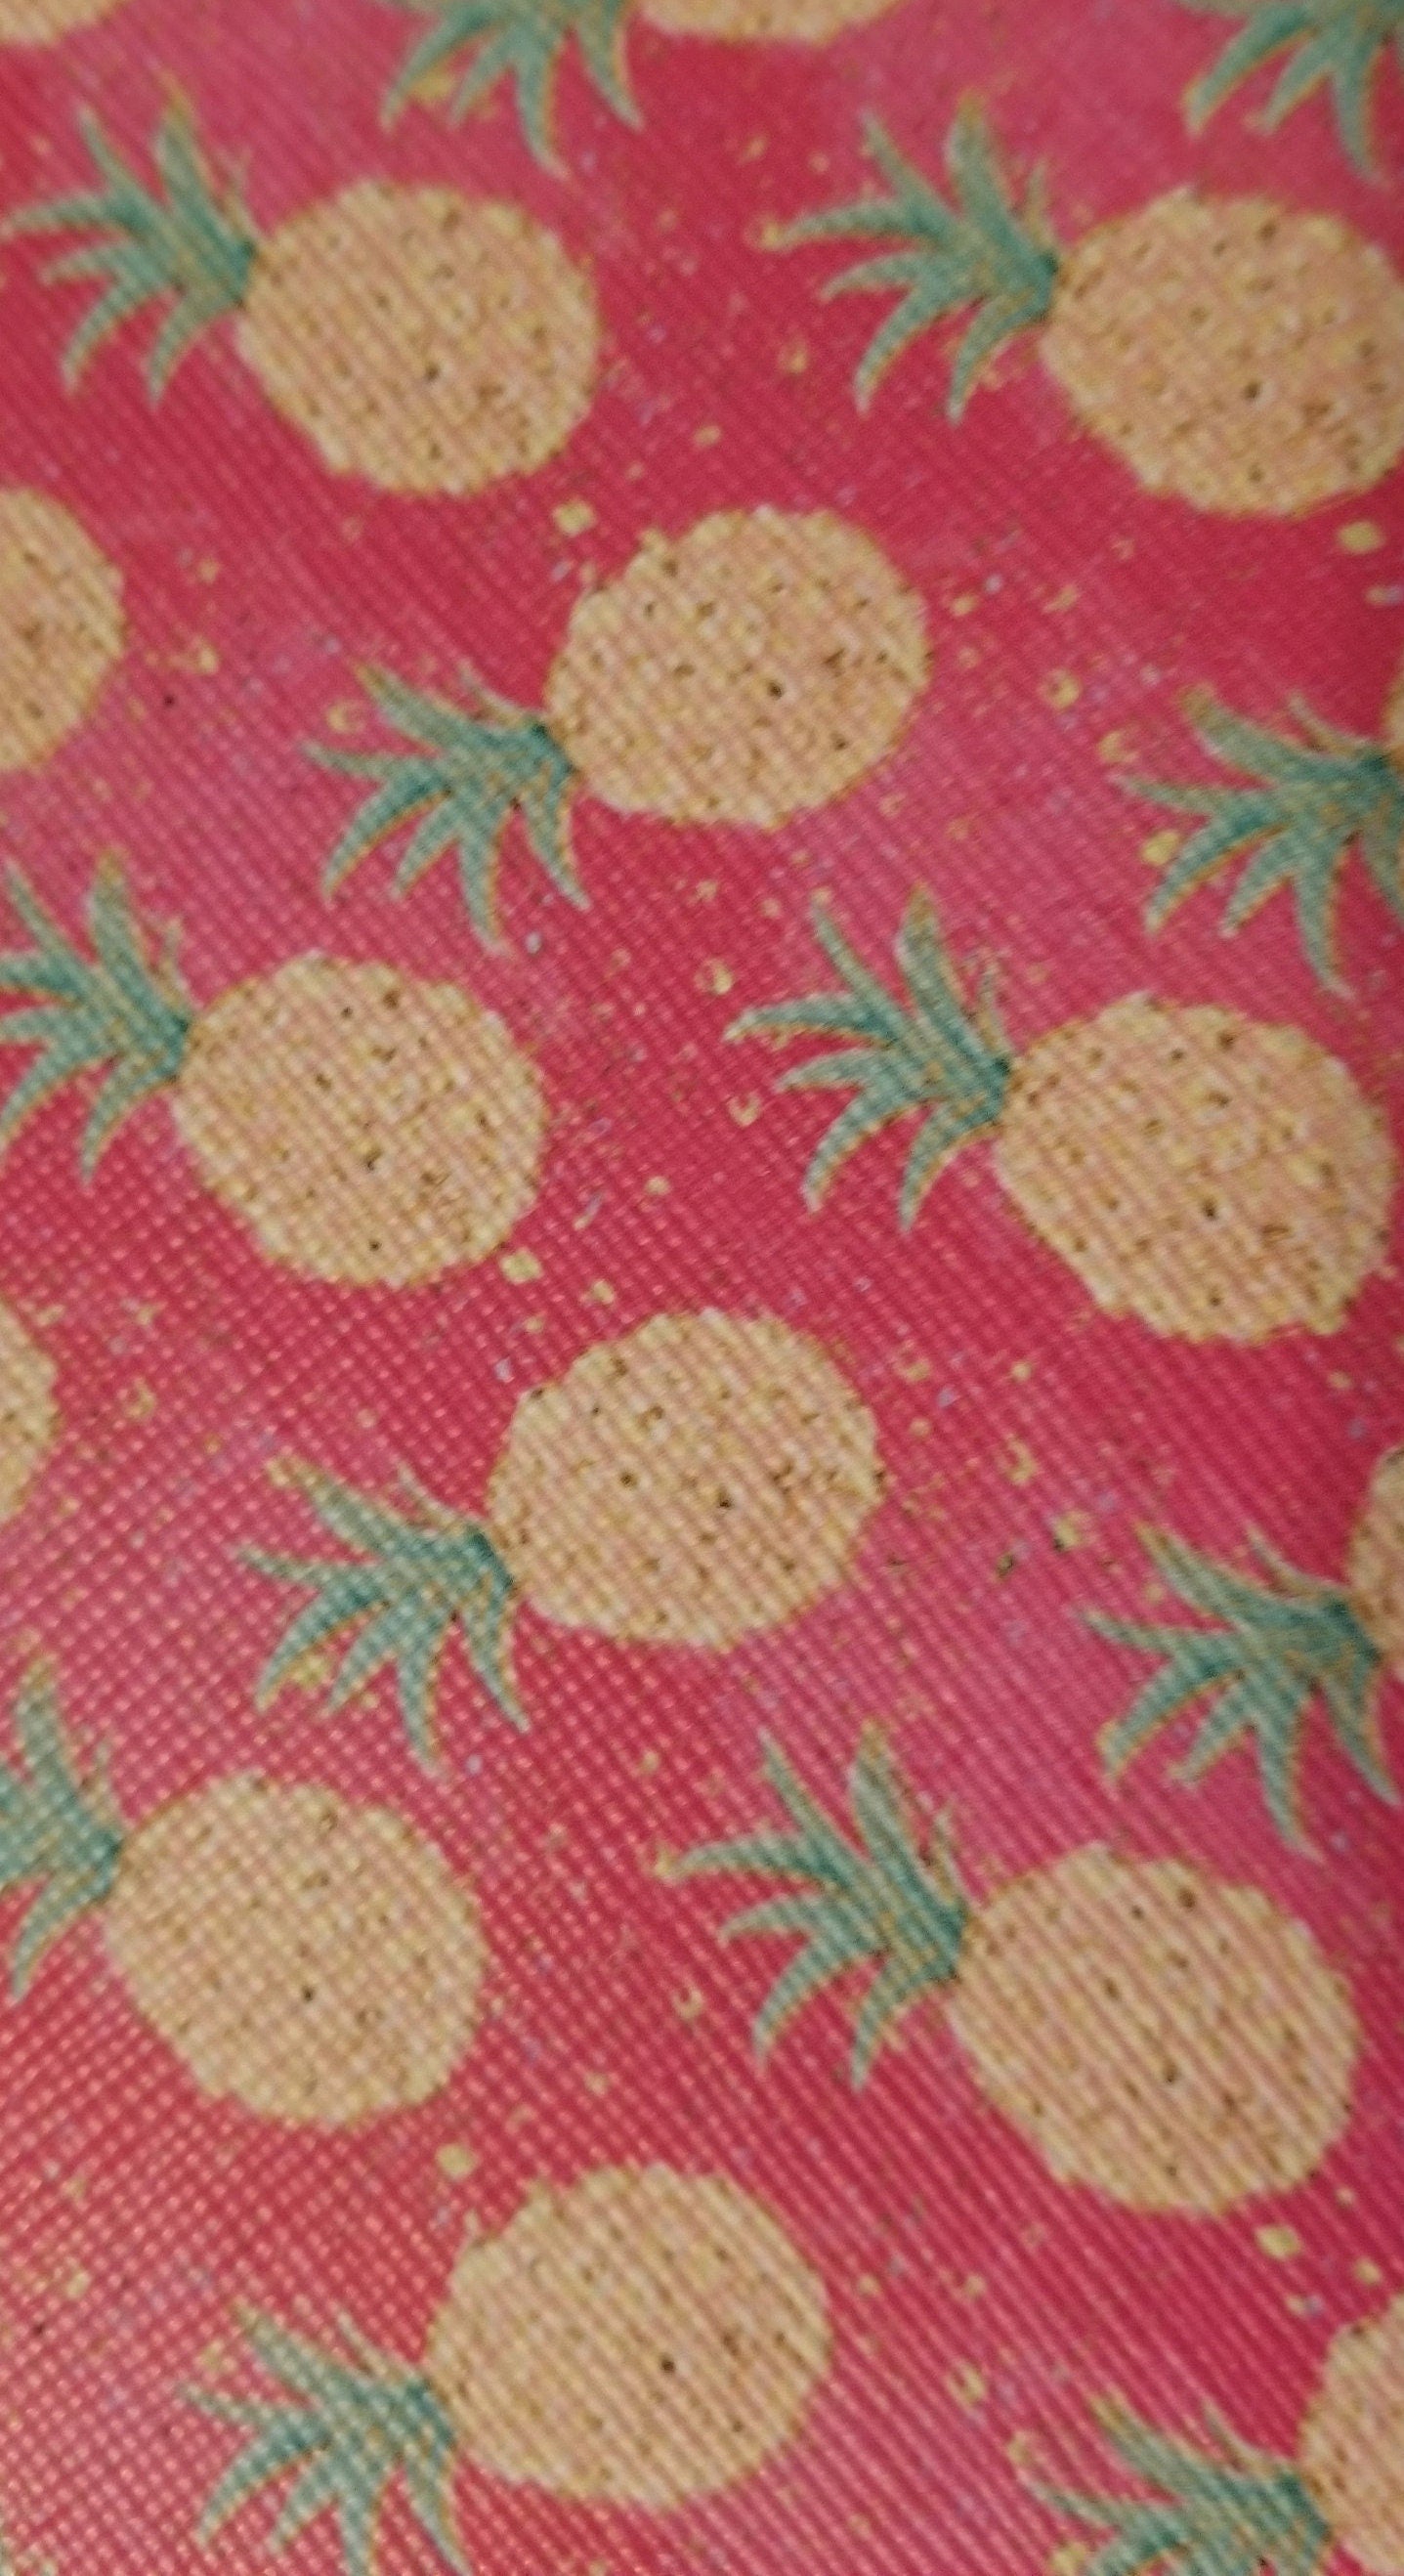 Pineapple on Pink faux leather sheets great for bows and earrings TheFabricDude